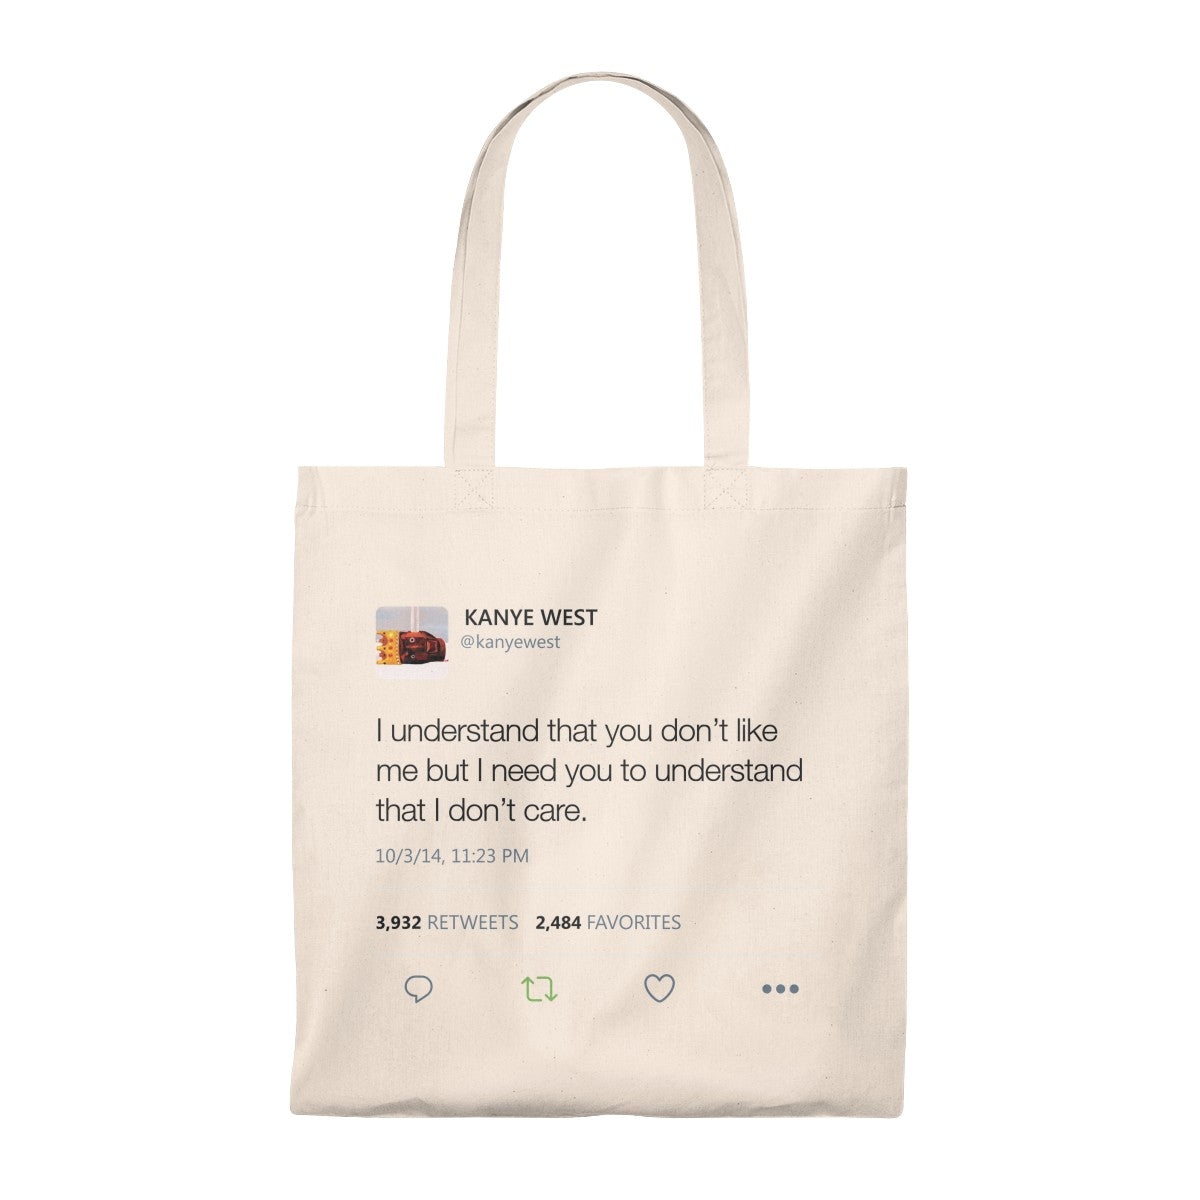 I Understand That You Don't Like Me But I Need You To Understand That I DonT Care Kanye West Tweet Tote Bag-Natural/Natural-Archethype